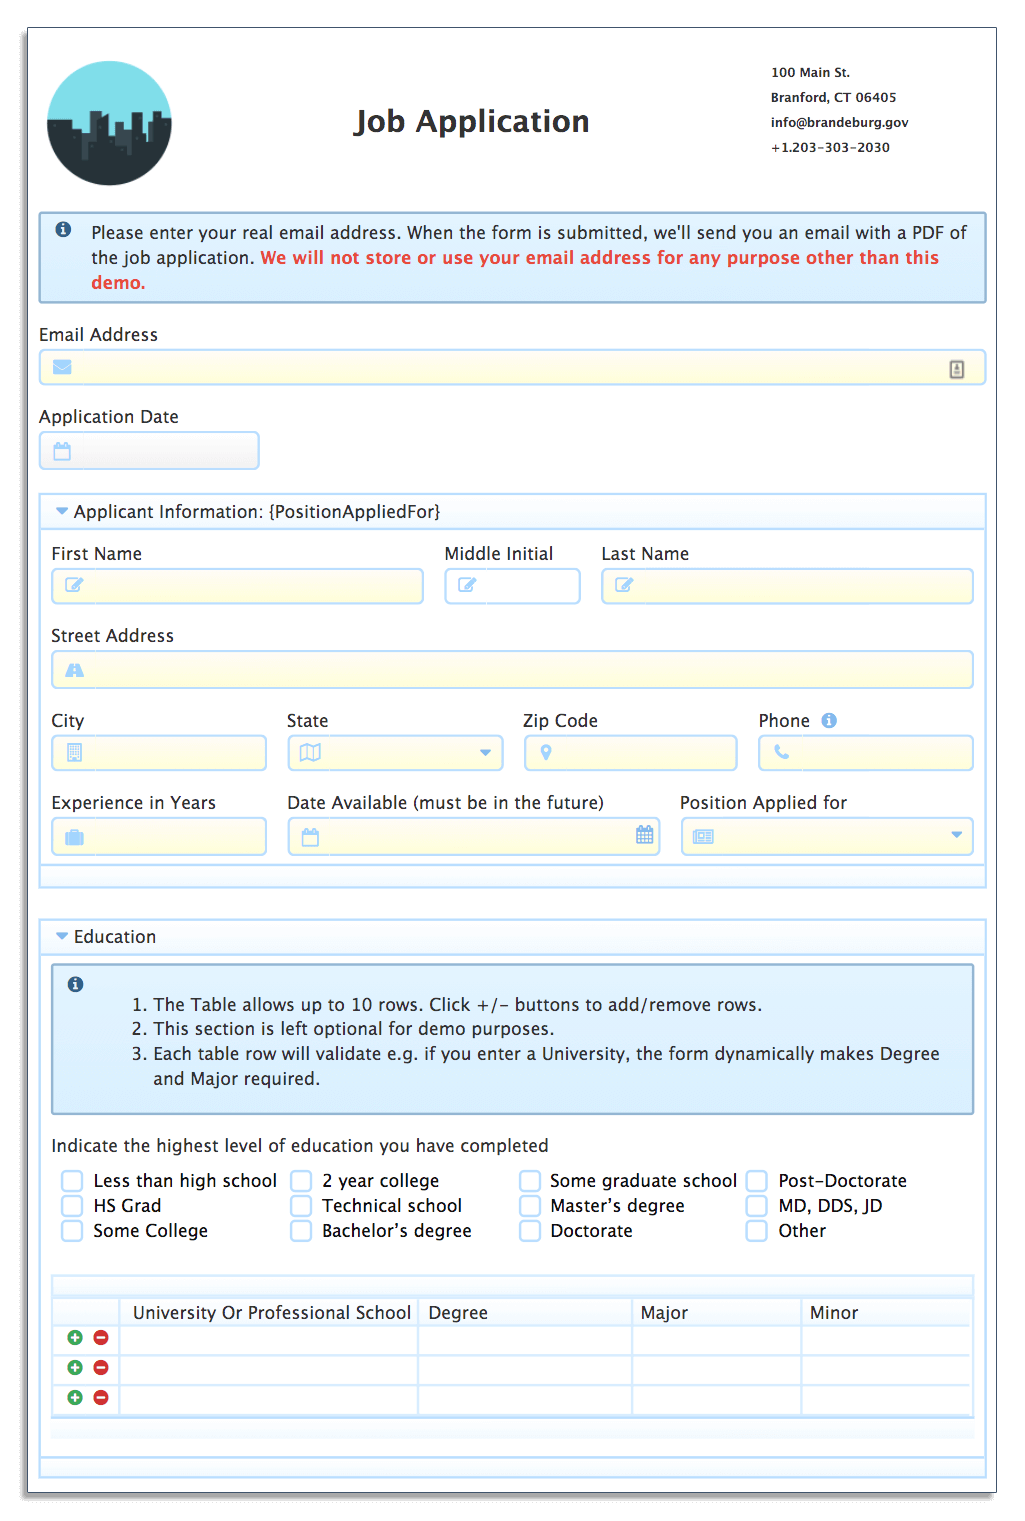 Example of a job application form